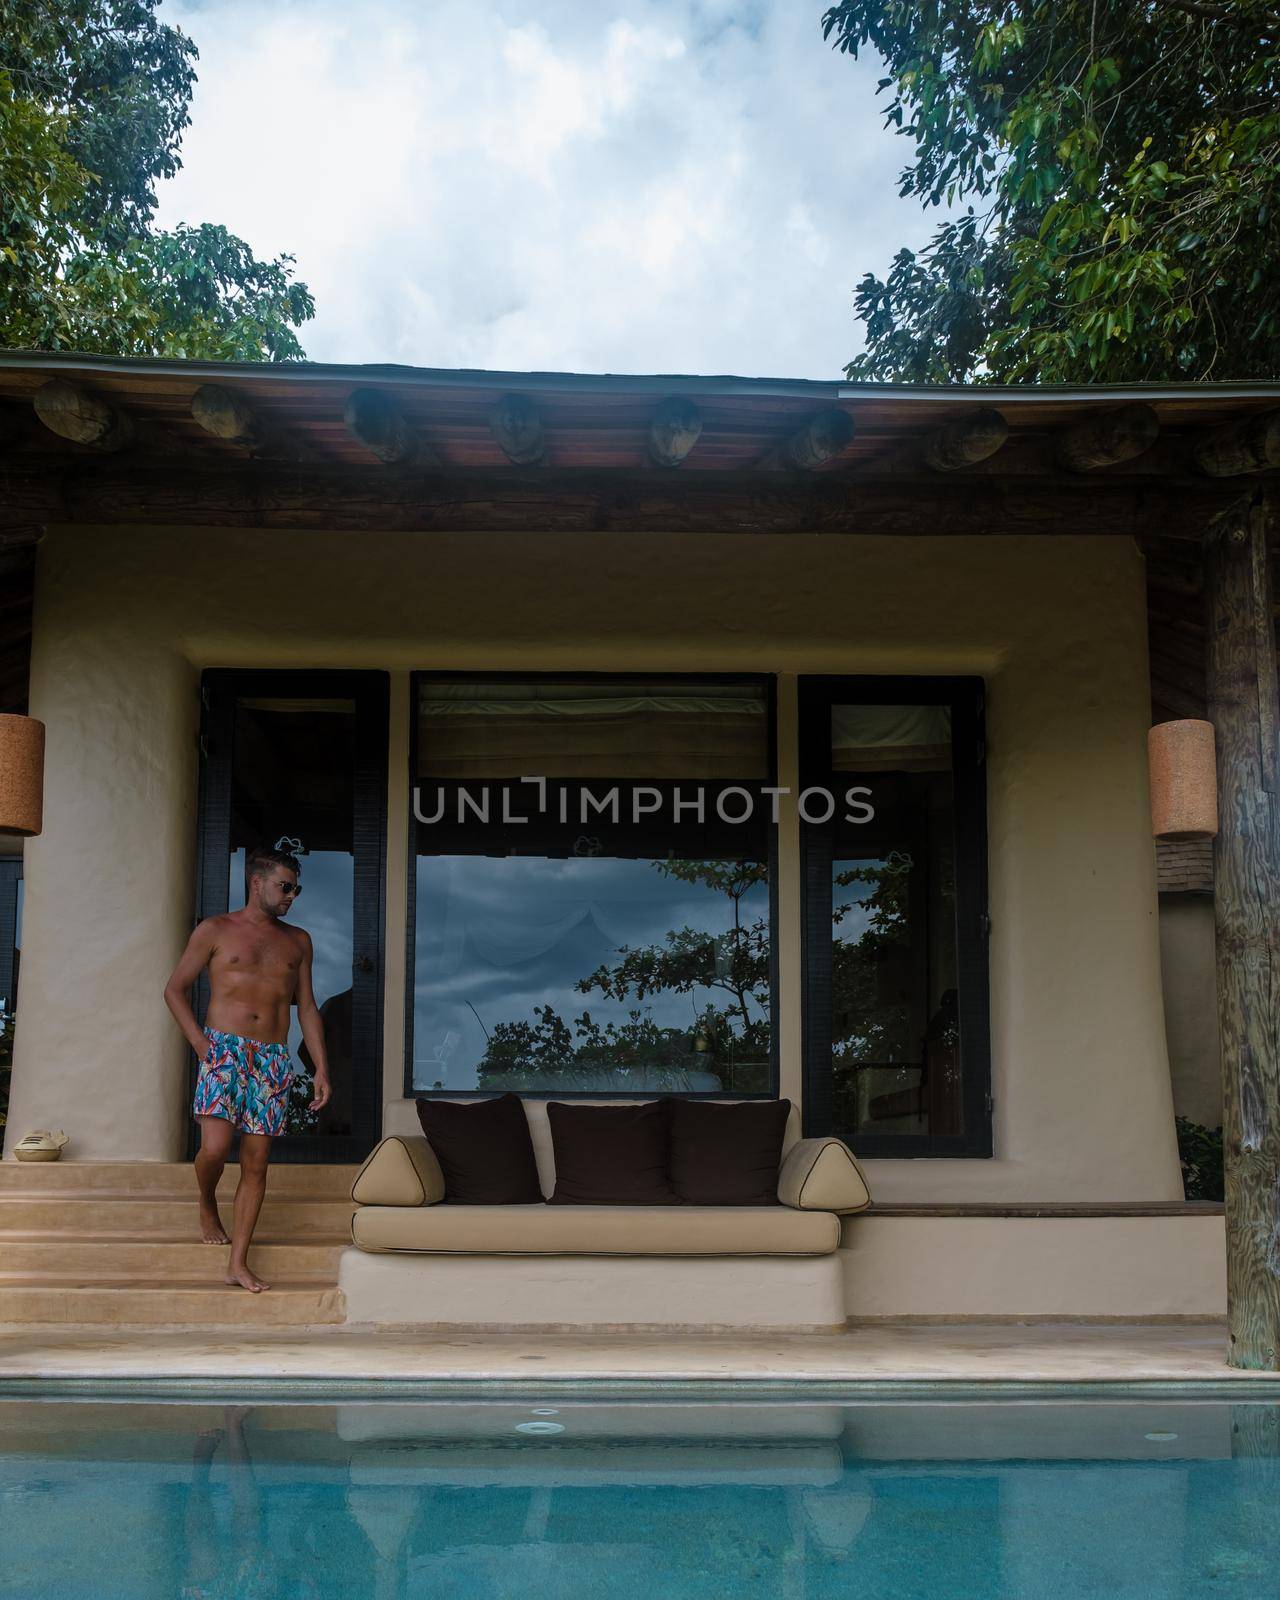 European man at infinity pool looking out over the ocean, luxury vacation private pool villa, luxury retreat